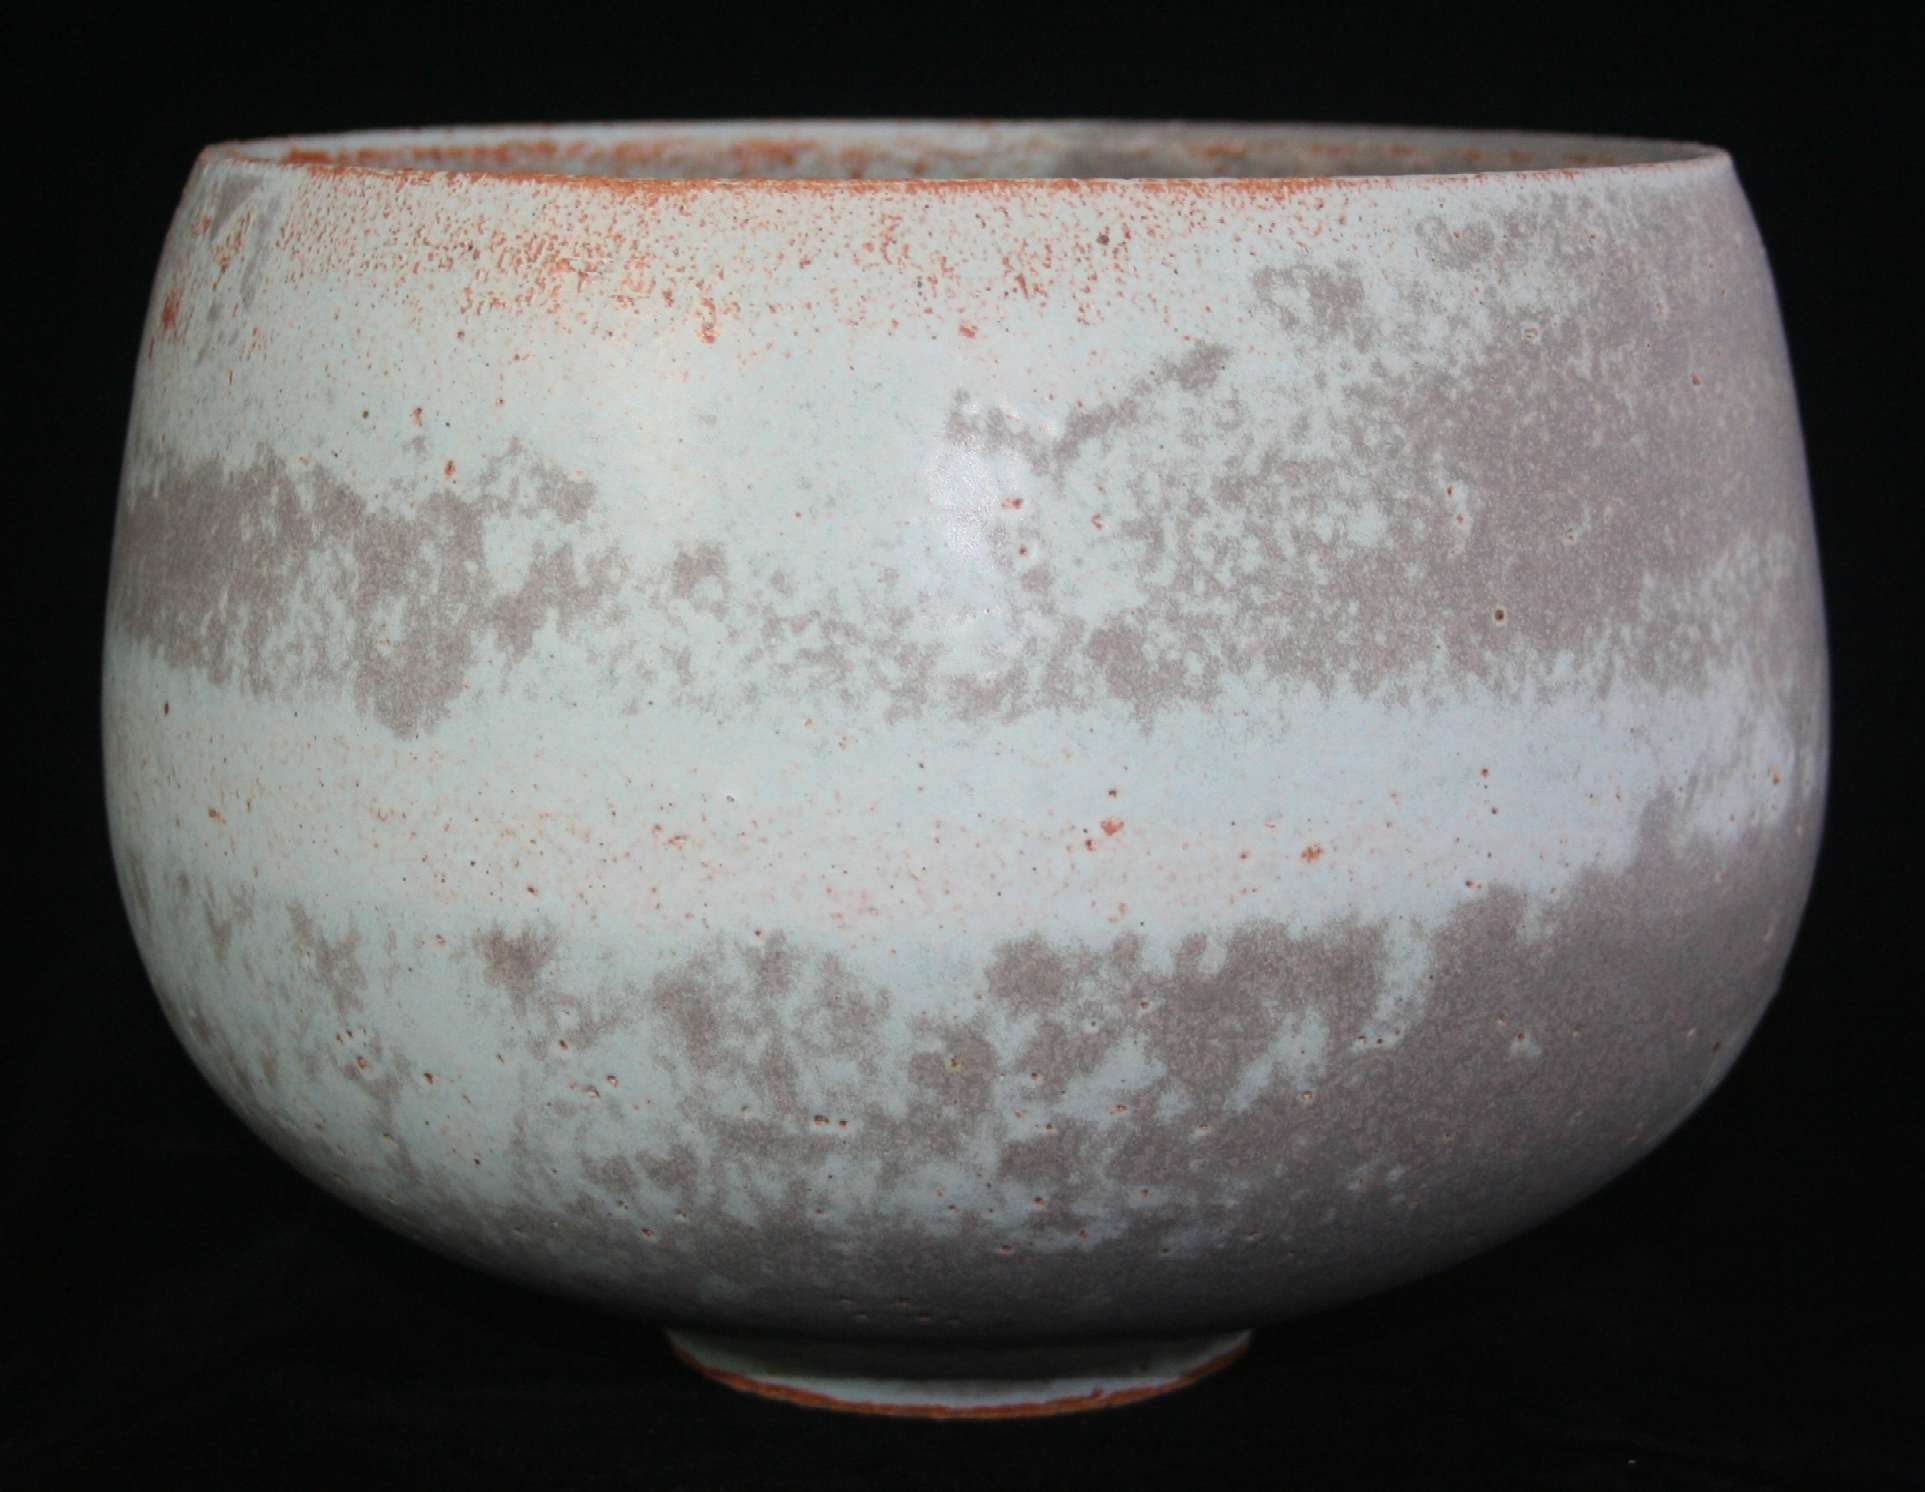 Clouded sky blue glaze on stoneware clay d: 290mm h: 190mm